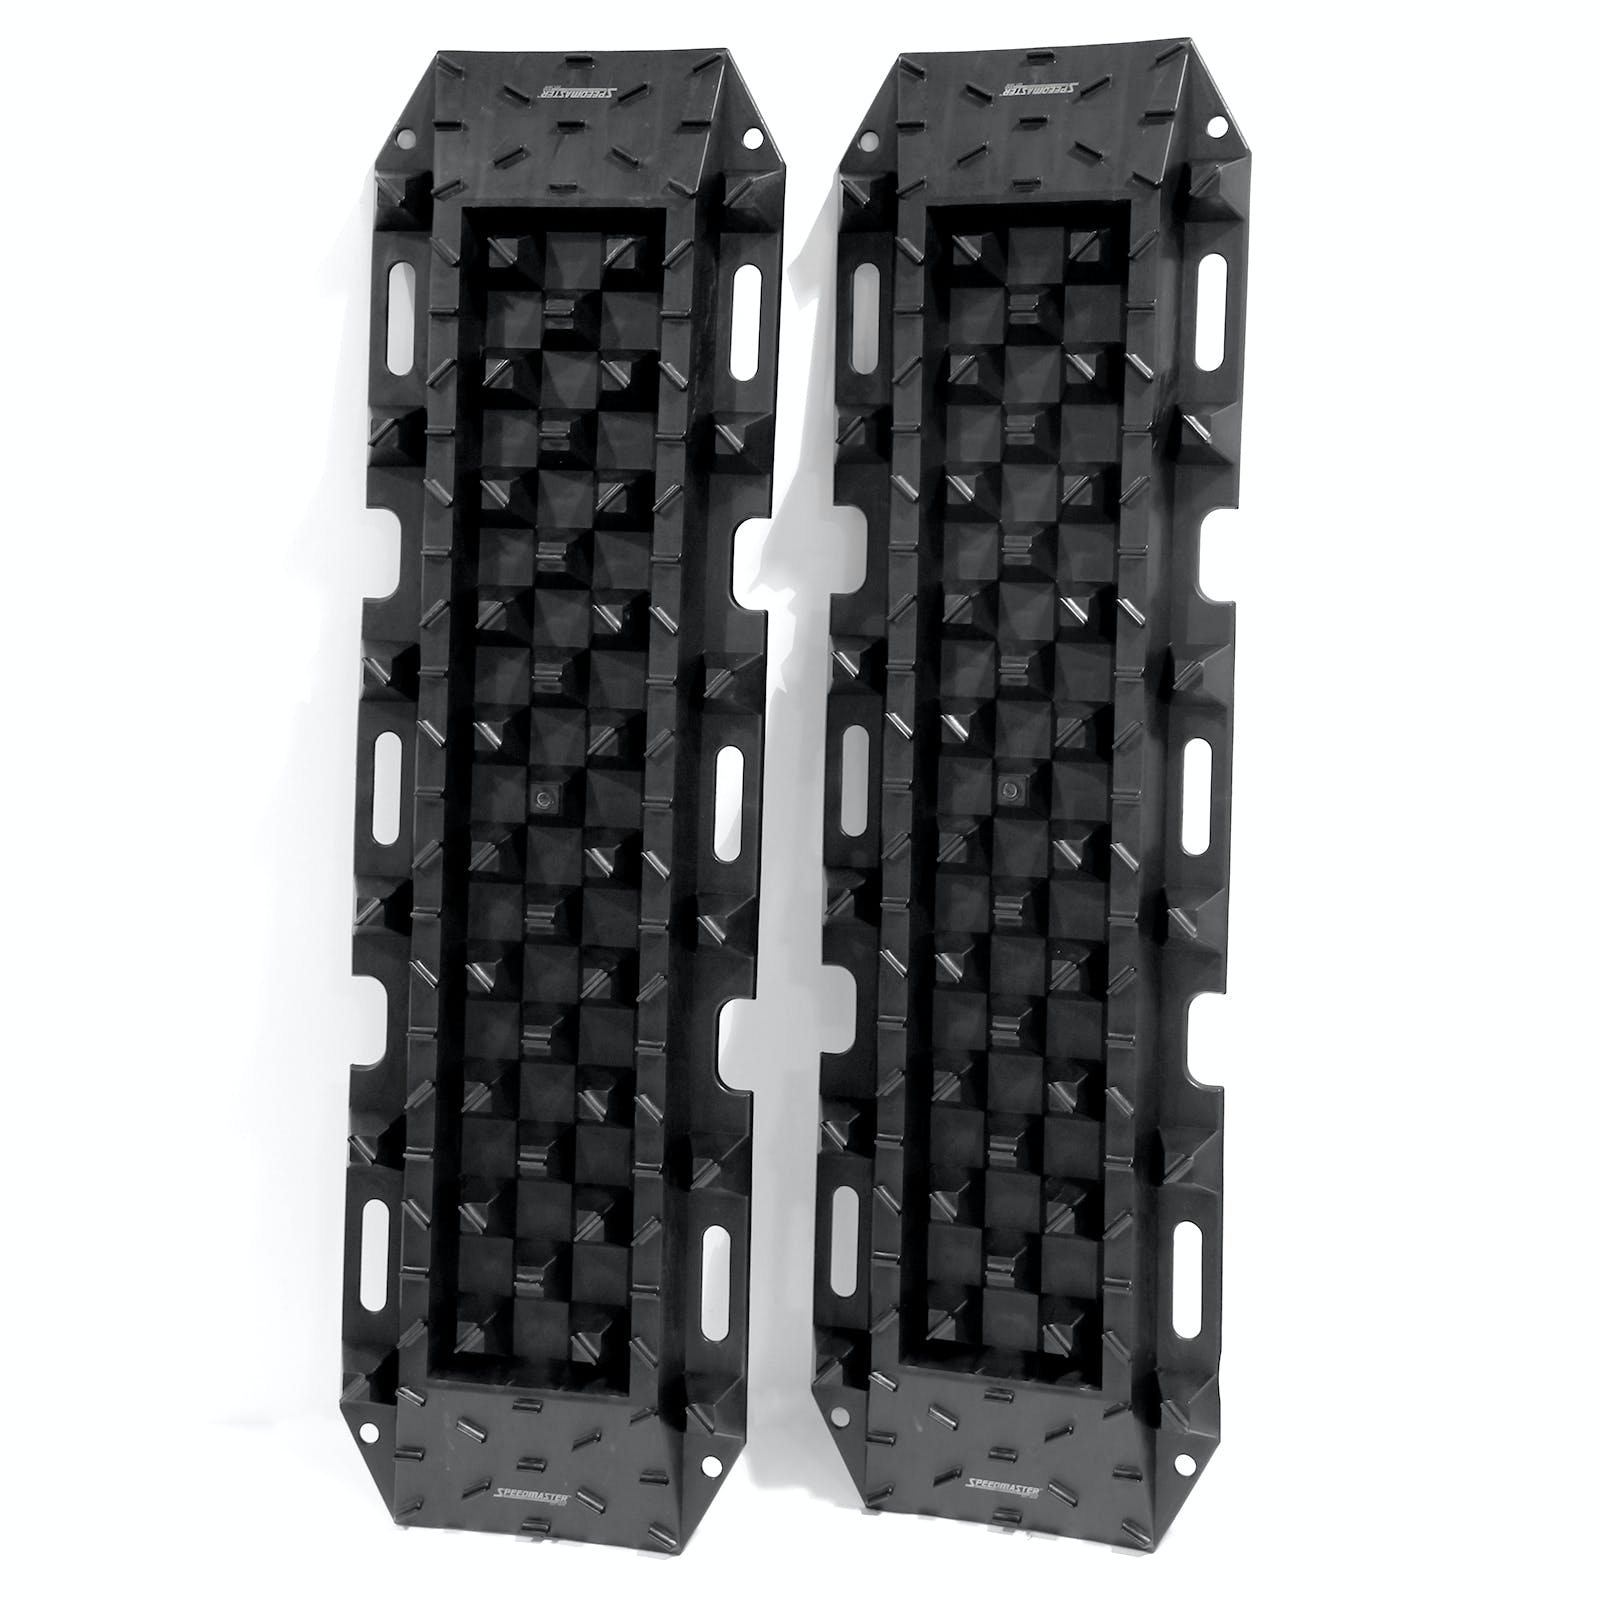 Speedmaster PCE561.1002 4WD Recovery Traction Tracks Sand Mud Snow Off Road - Pair